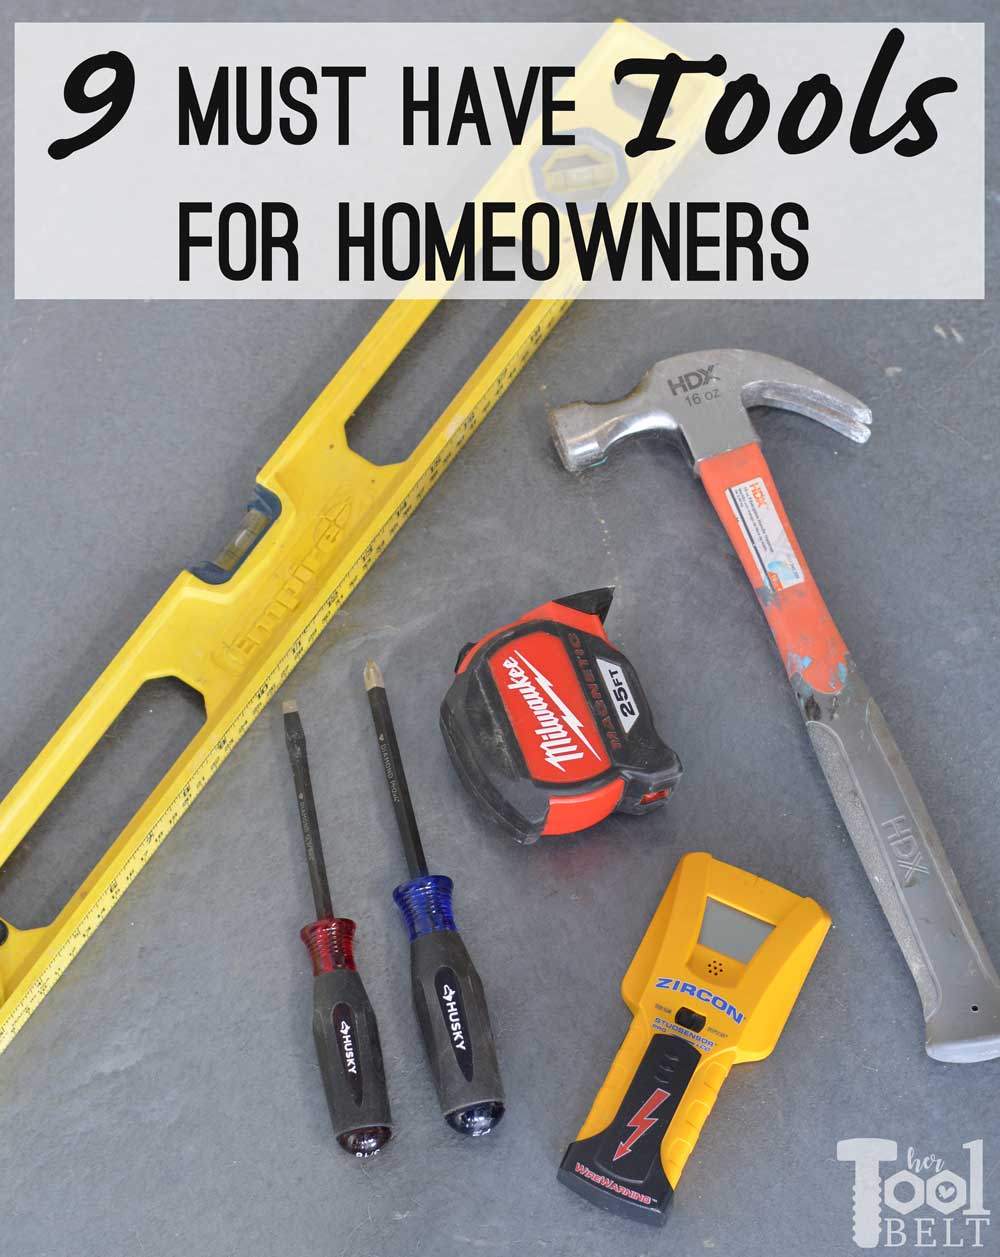 Top 10 Must Have Tools in Your Home for Any Matter - MyBayut